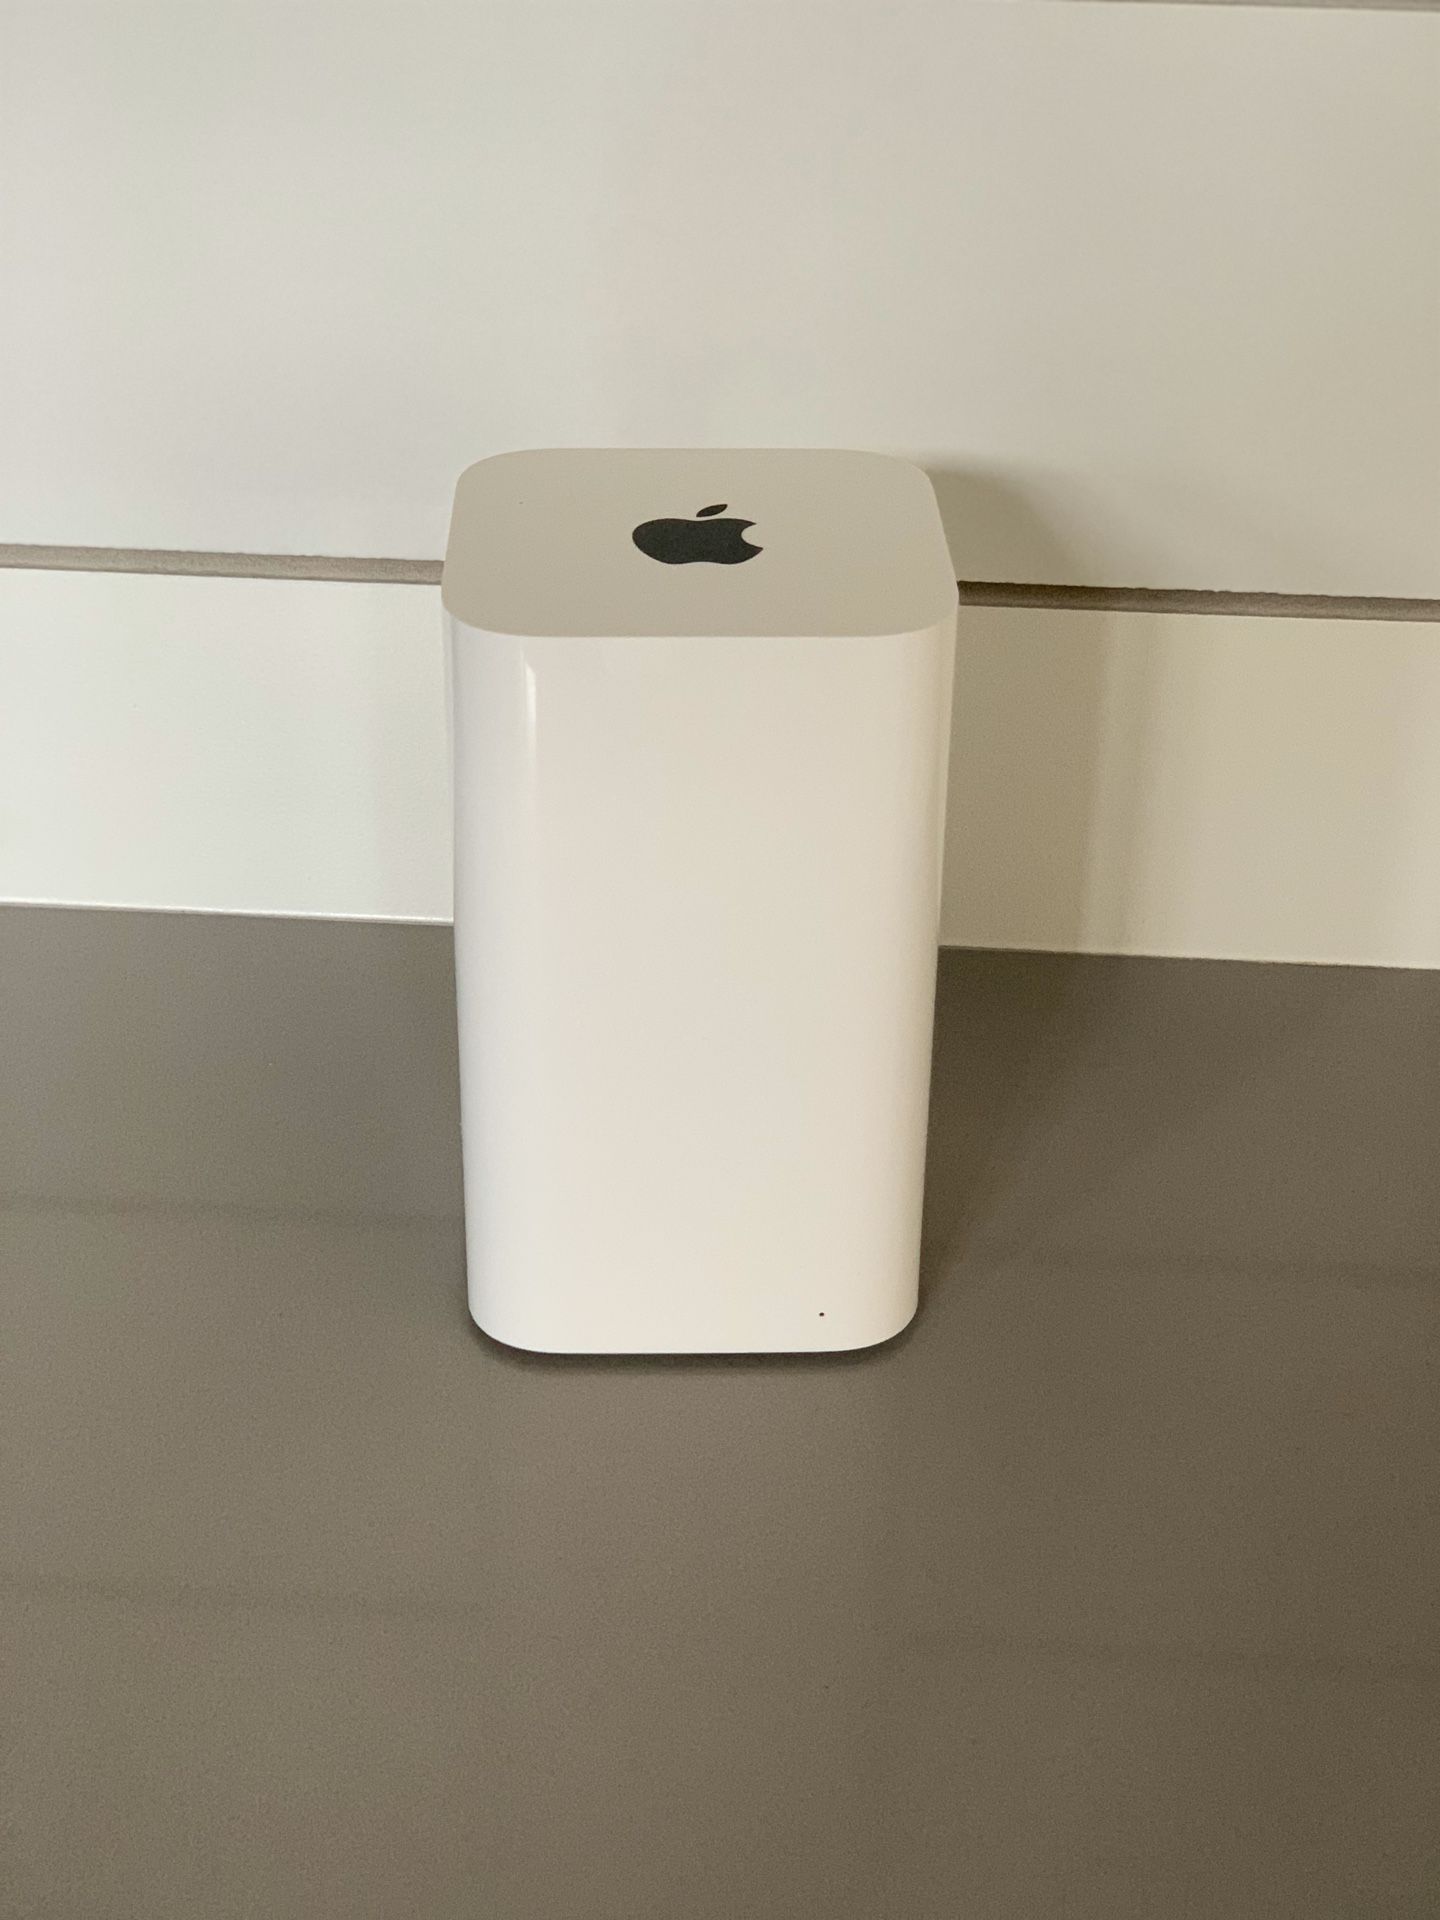 AirPort Extreme WiFi Router